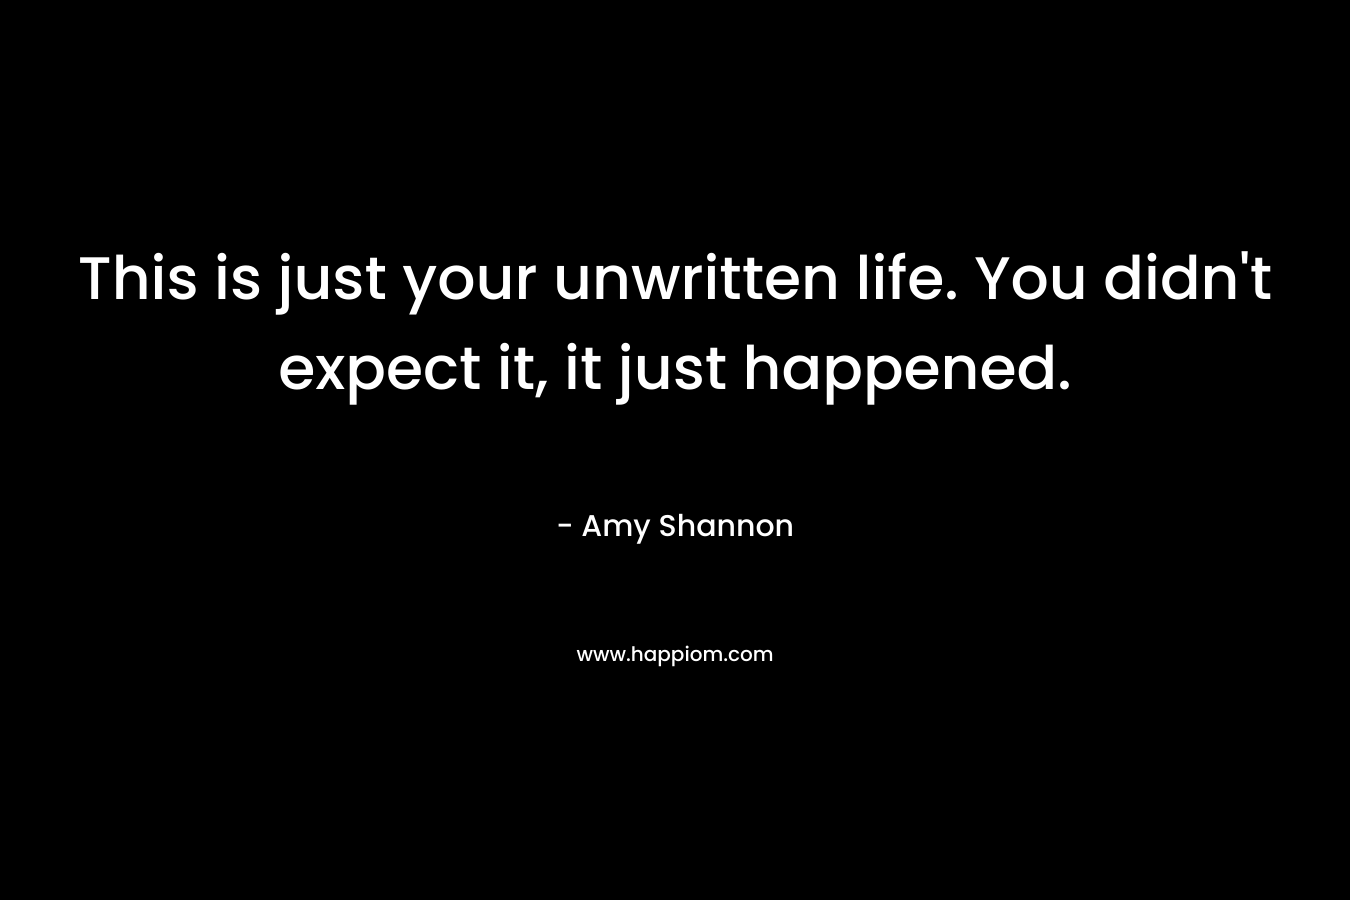 This is just your unwritten life. You didn’t expect it, it just happened. – Amy Shannon